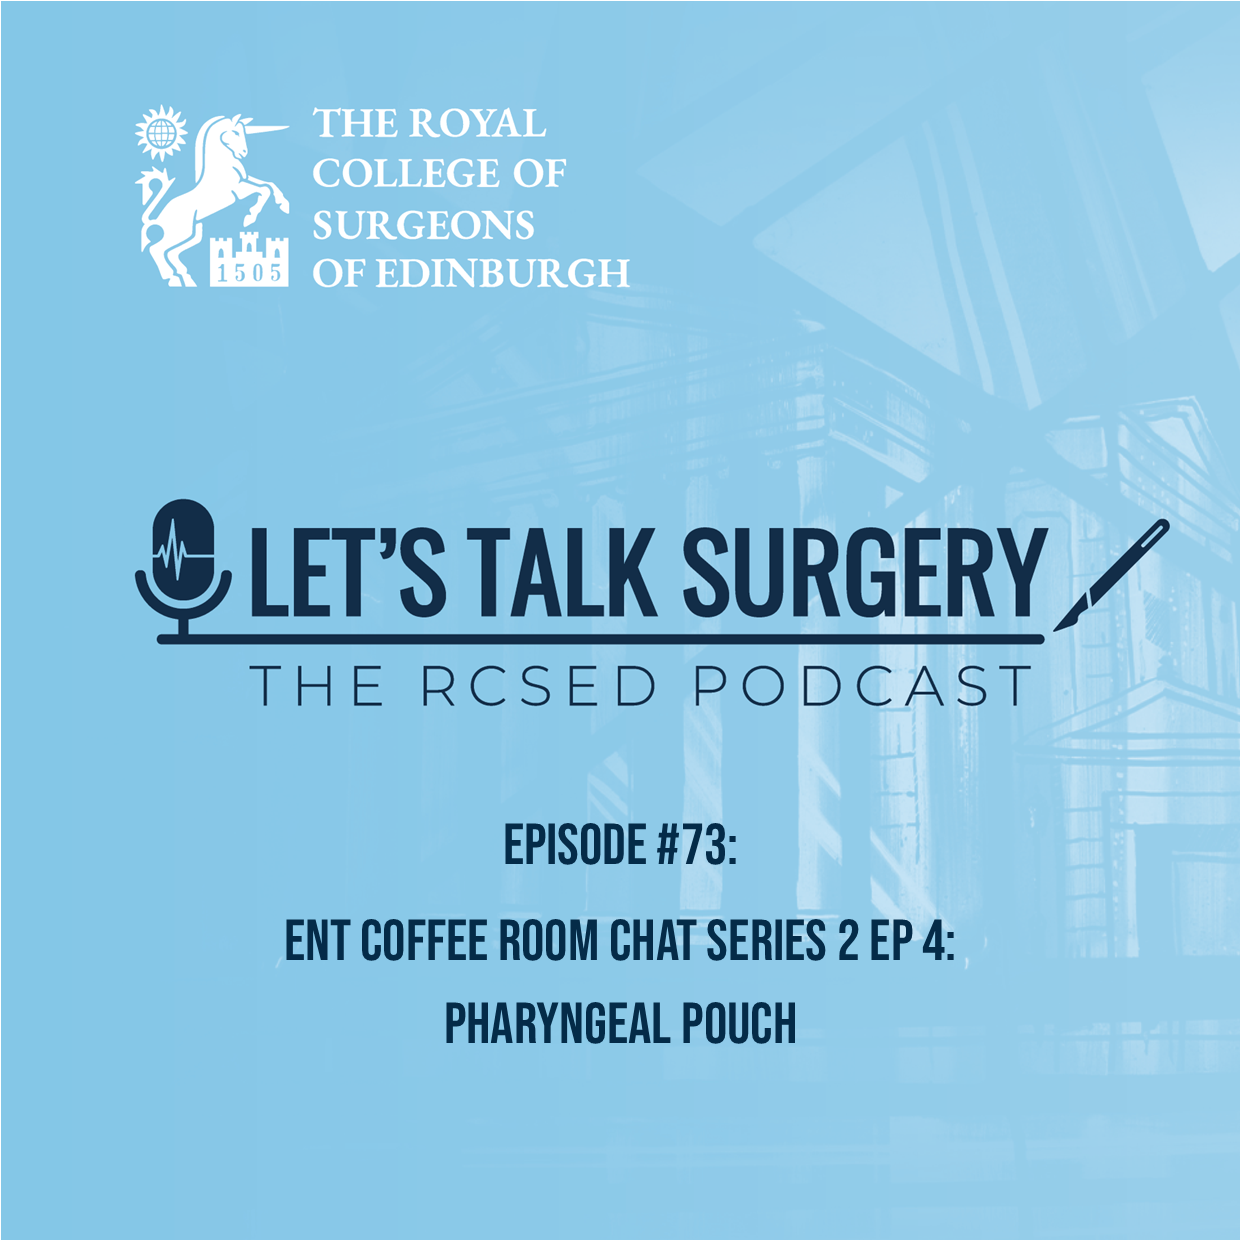 ENT Coffee Room Chat Series 2: Ep 4 - Pharyngeal Pouch